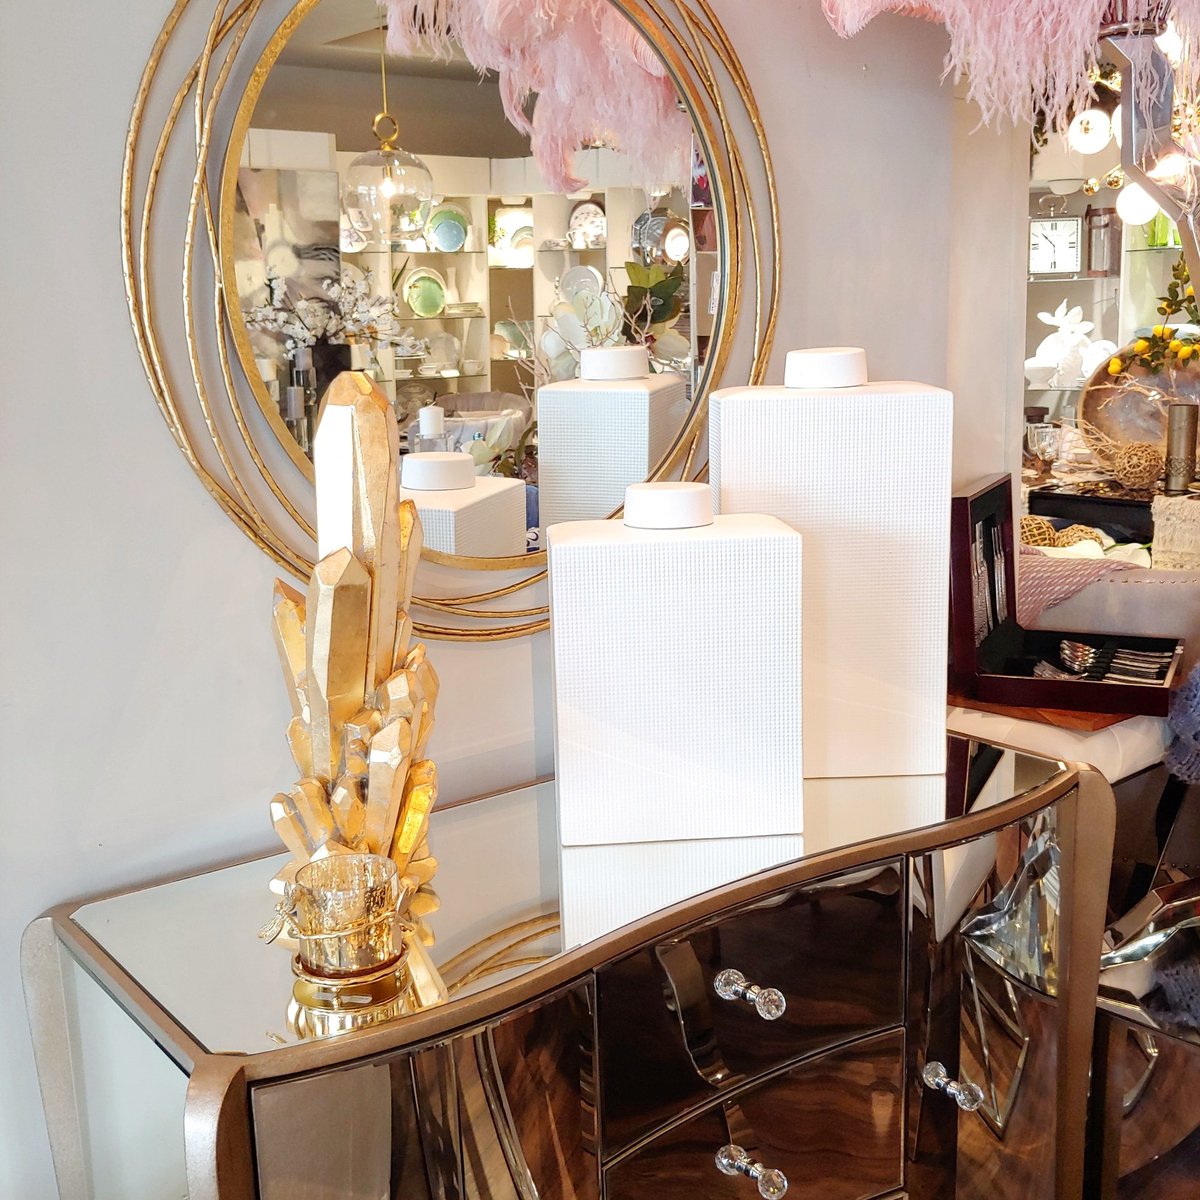 Reflective services and are a great option for making a small space appear bigger and why not make the space stylish too.⠀⠀⠀⠀
#designtips #homedecorideas  #decorativemirror #reflectivesurfaces #interiordesign #goldaccents